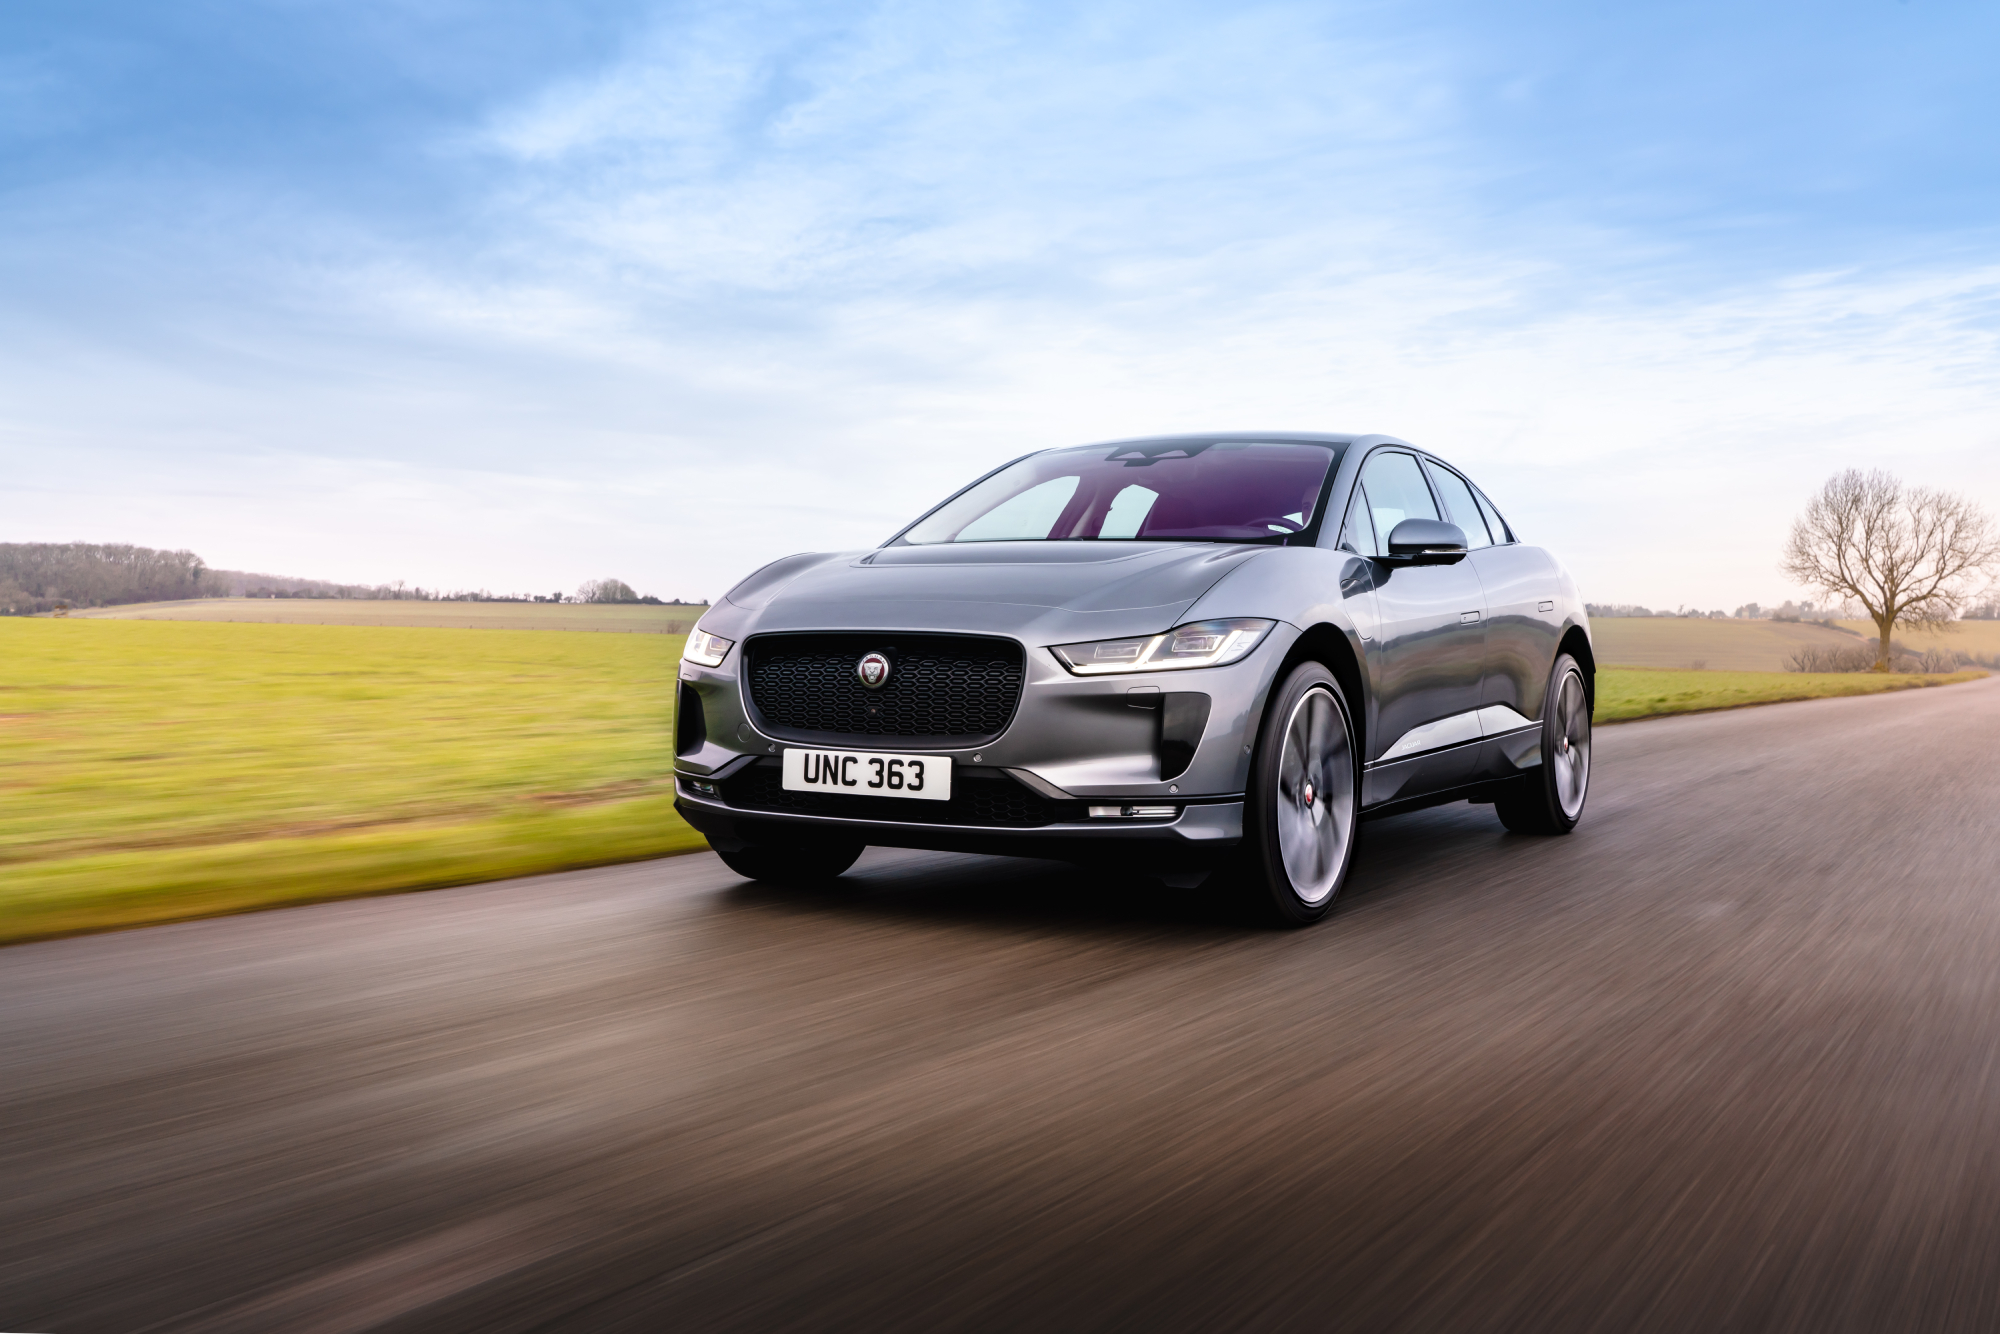 Jaguar I-Pace is one of the best luxury electric cars